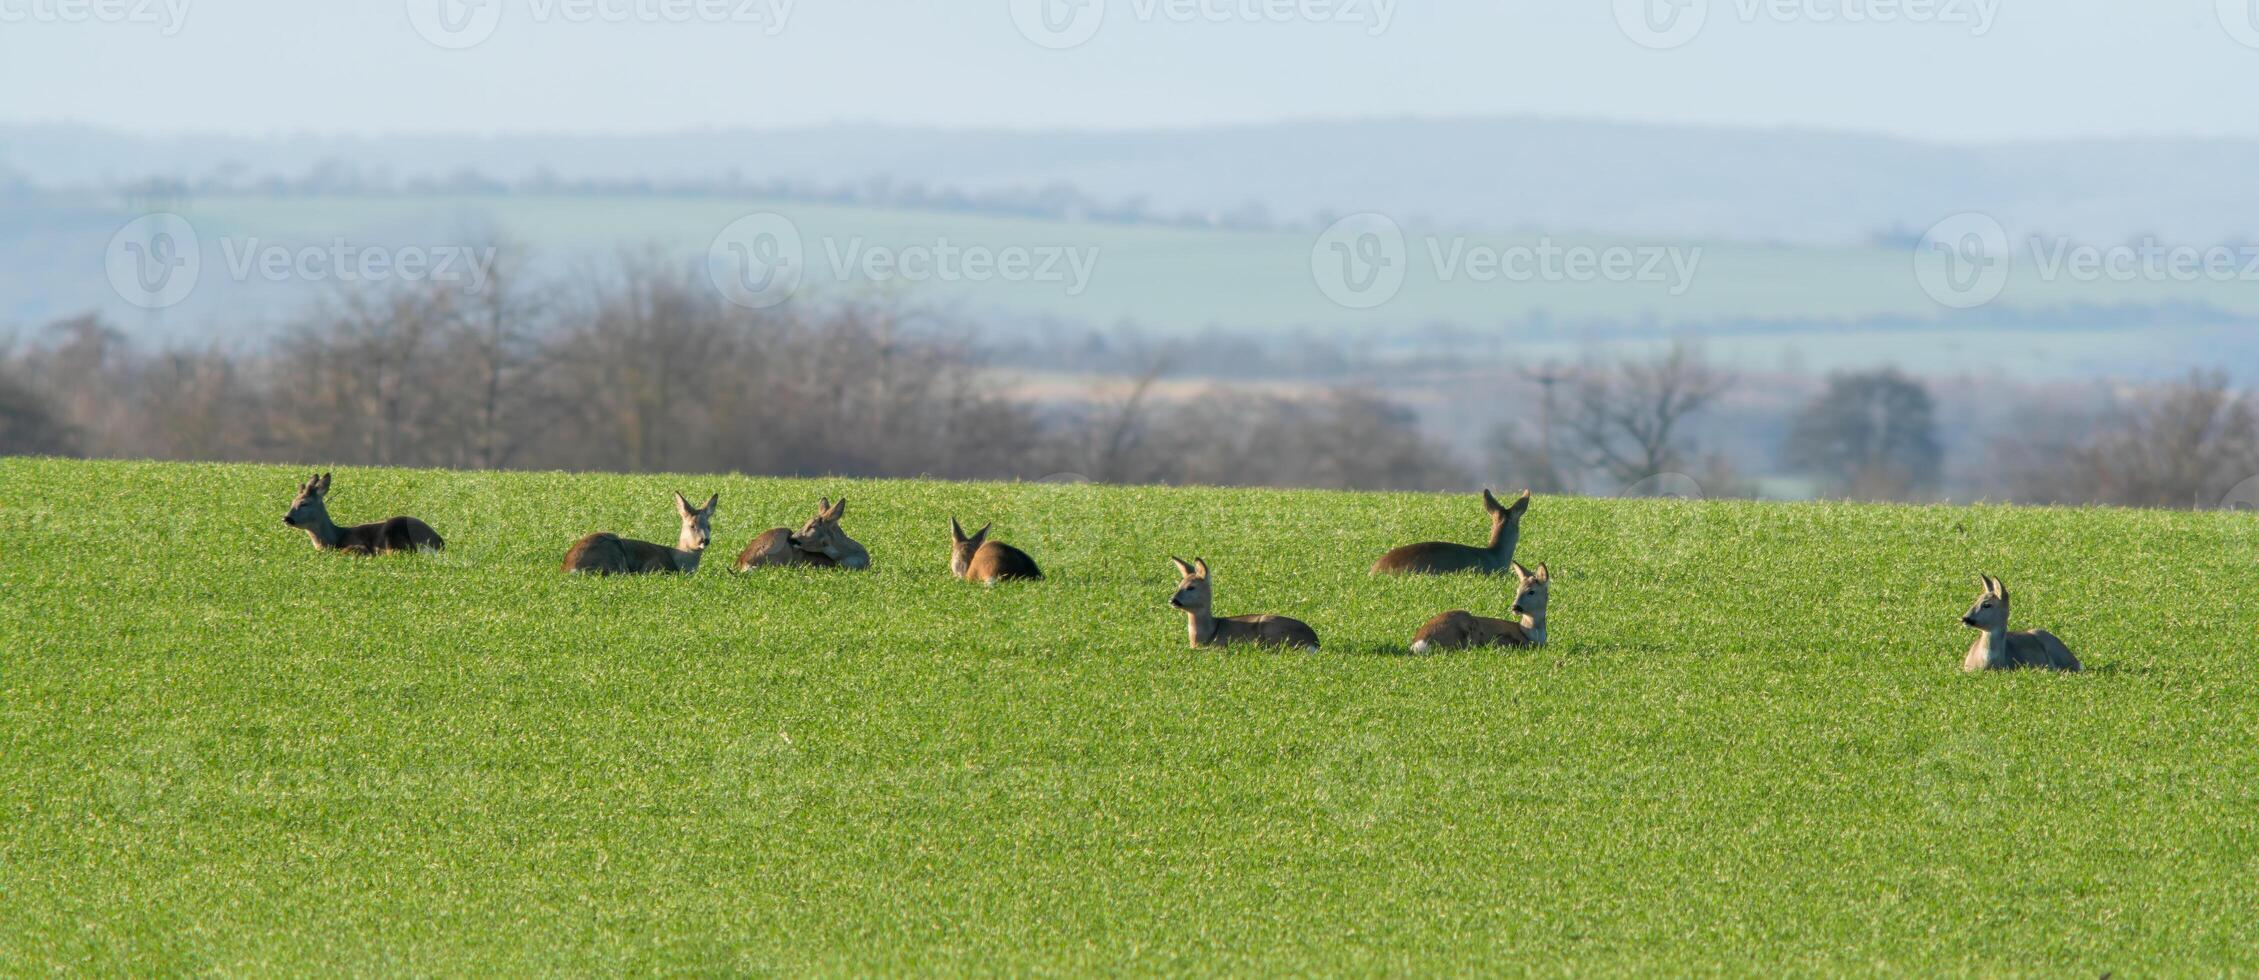 a group of deer in a field in spring photo